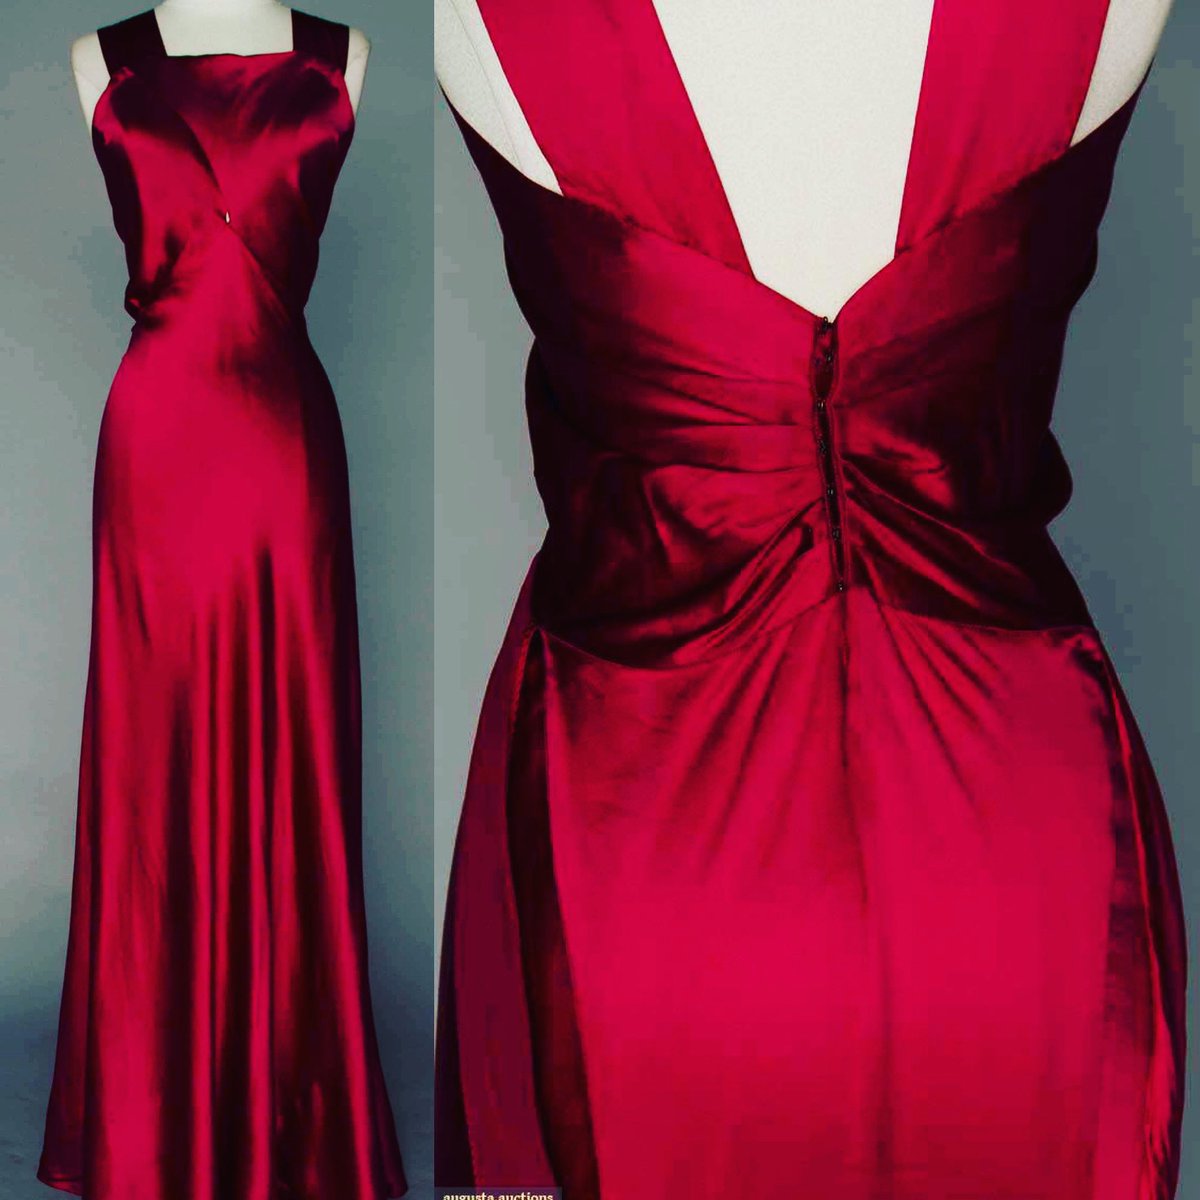 Try saying claret coloured satin three times fast….what a gown, #biascut thirties slink skimming the wearer beneath in the boldest of colours. The exposed back was entirely on trend for the decade that began to worship at the altar of the athletic body @AugustaAuction #1930s